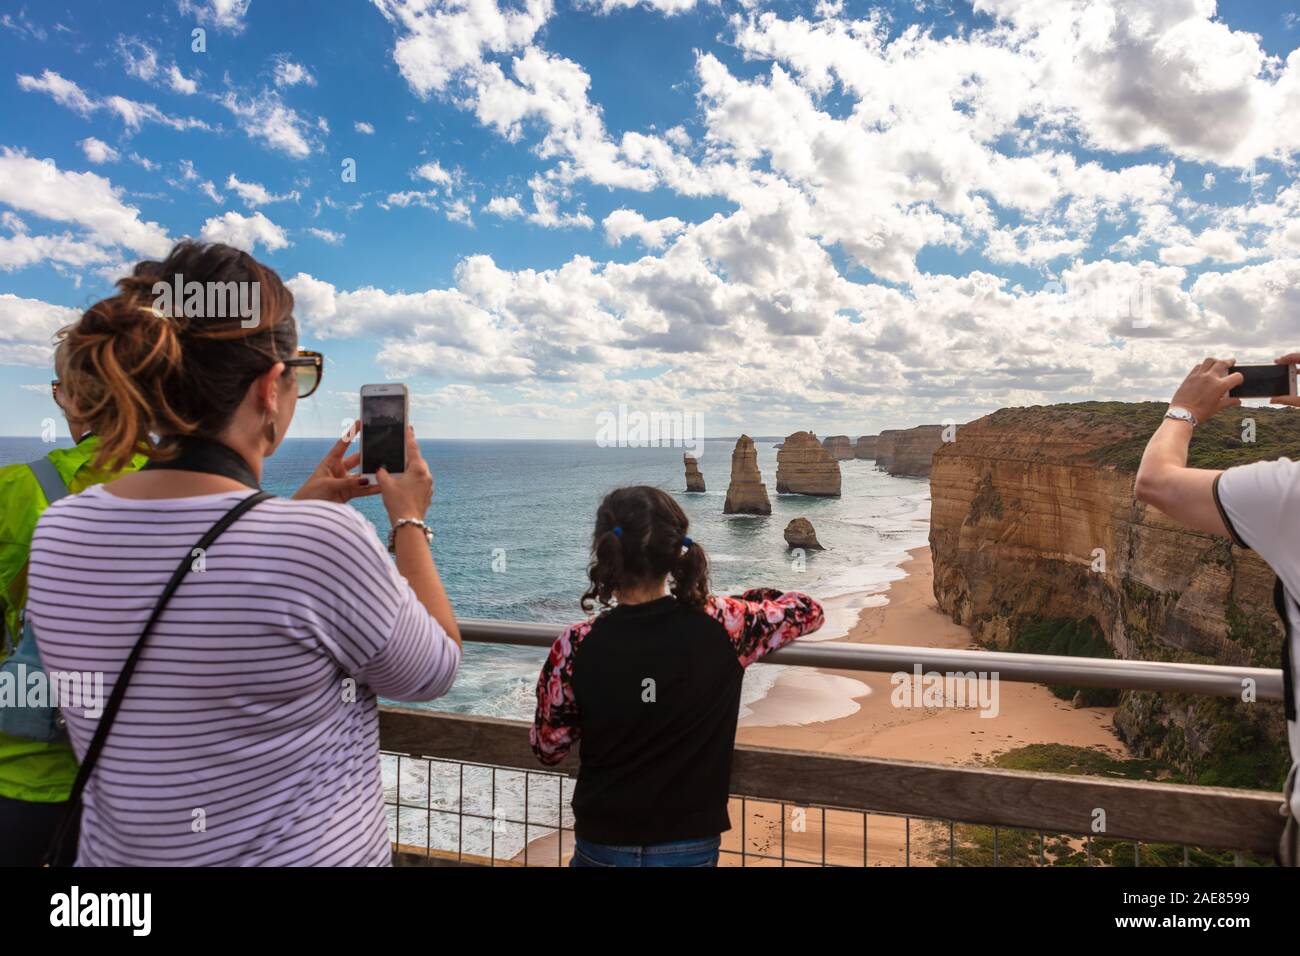 Tourists visiting the Great Ocean Road listed in Australian National Heritage register. Stock Photo